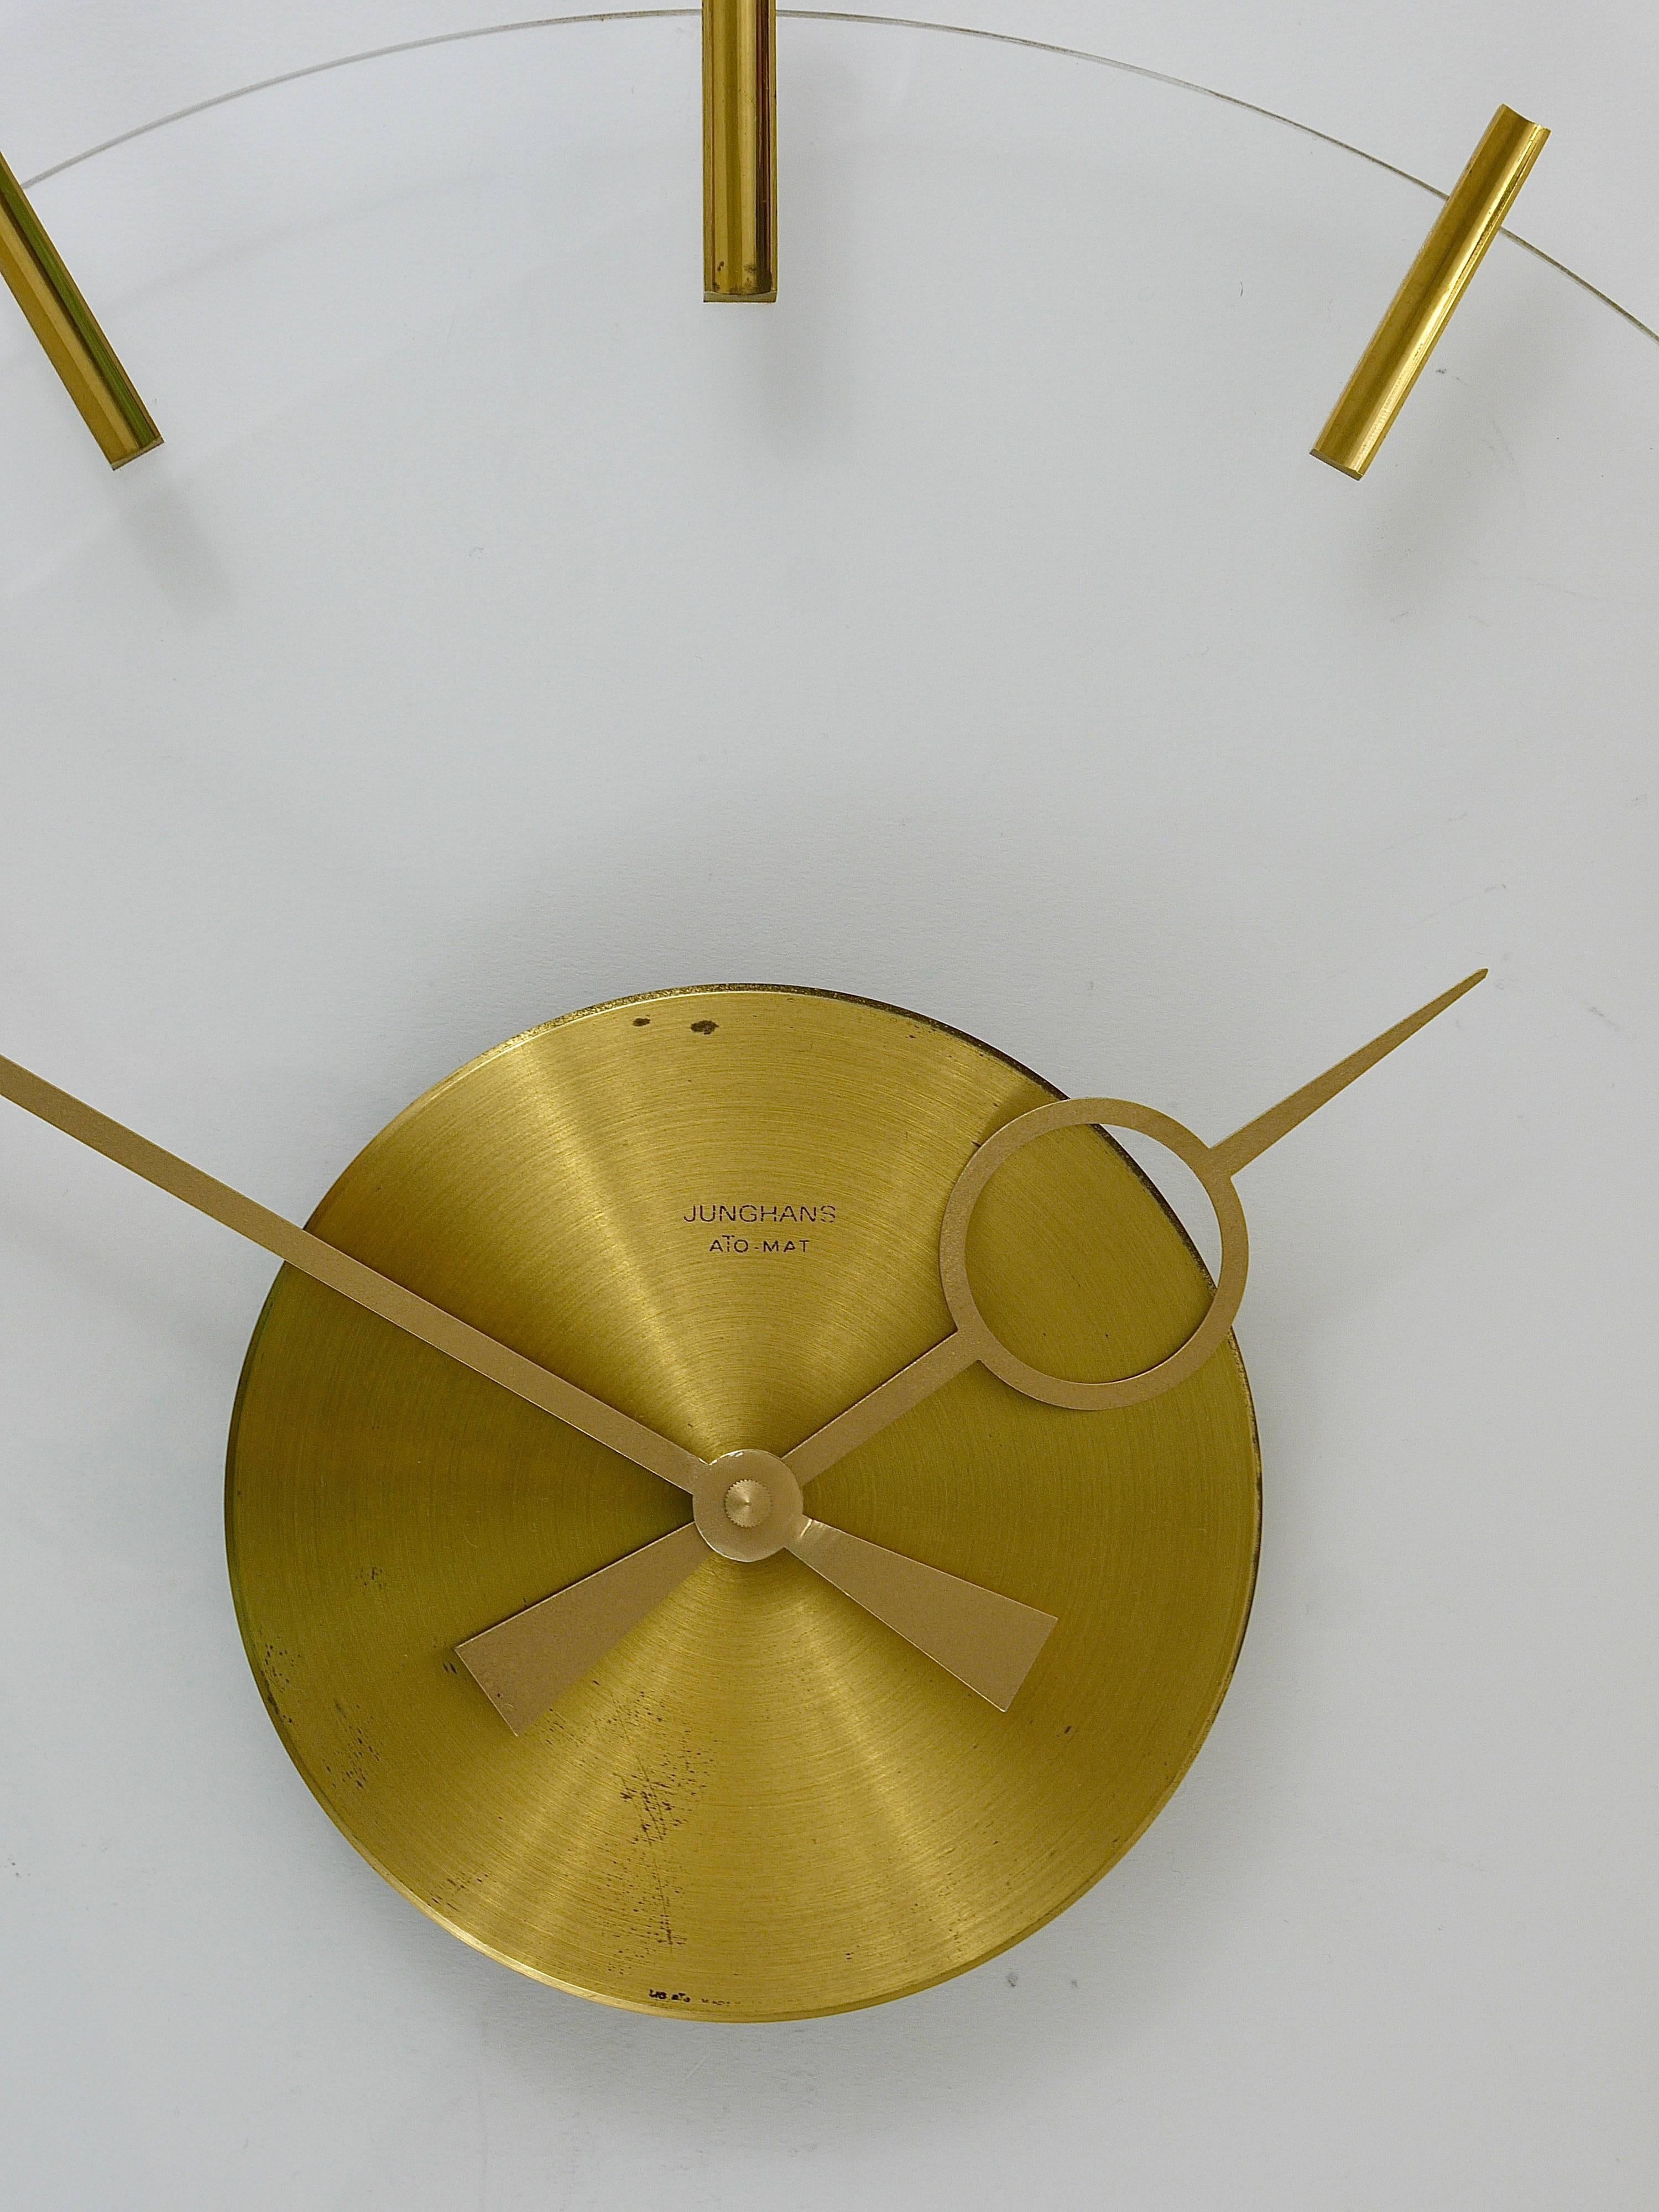 Junghans Ato-Mat Lucite Brass Midcentury Sun Wall Clock, Germany, 1950s 2